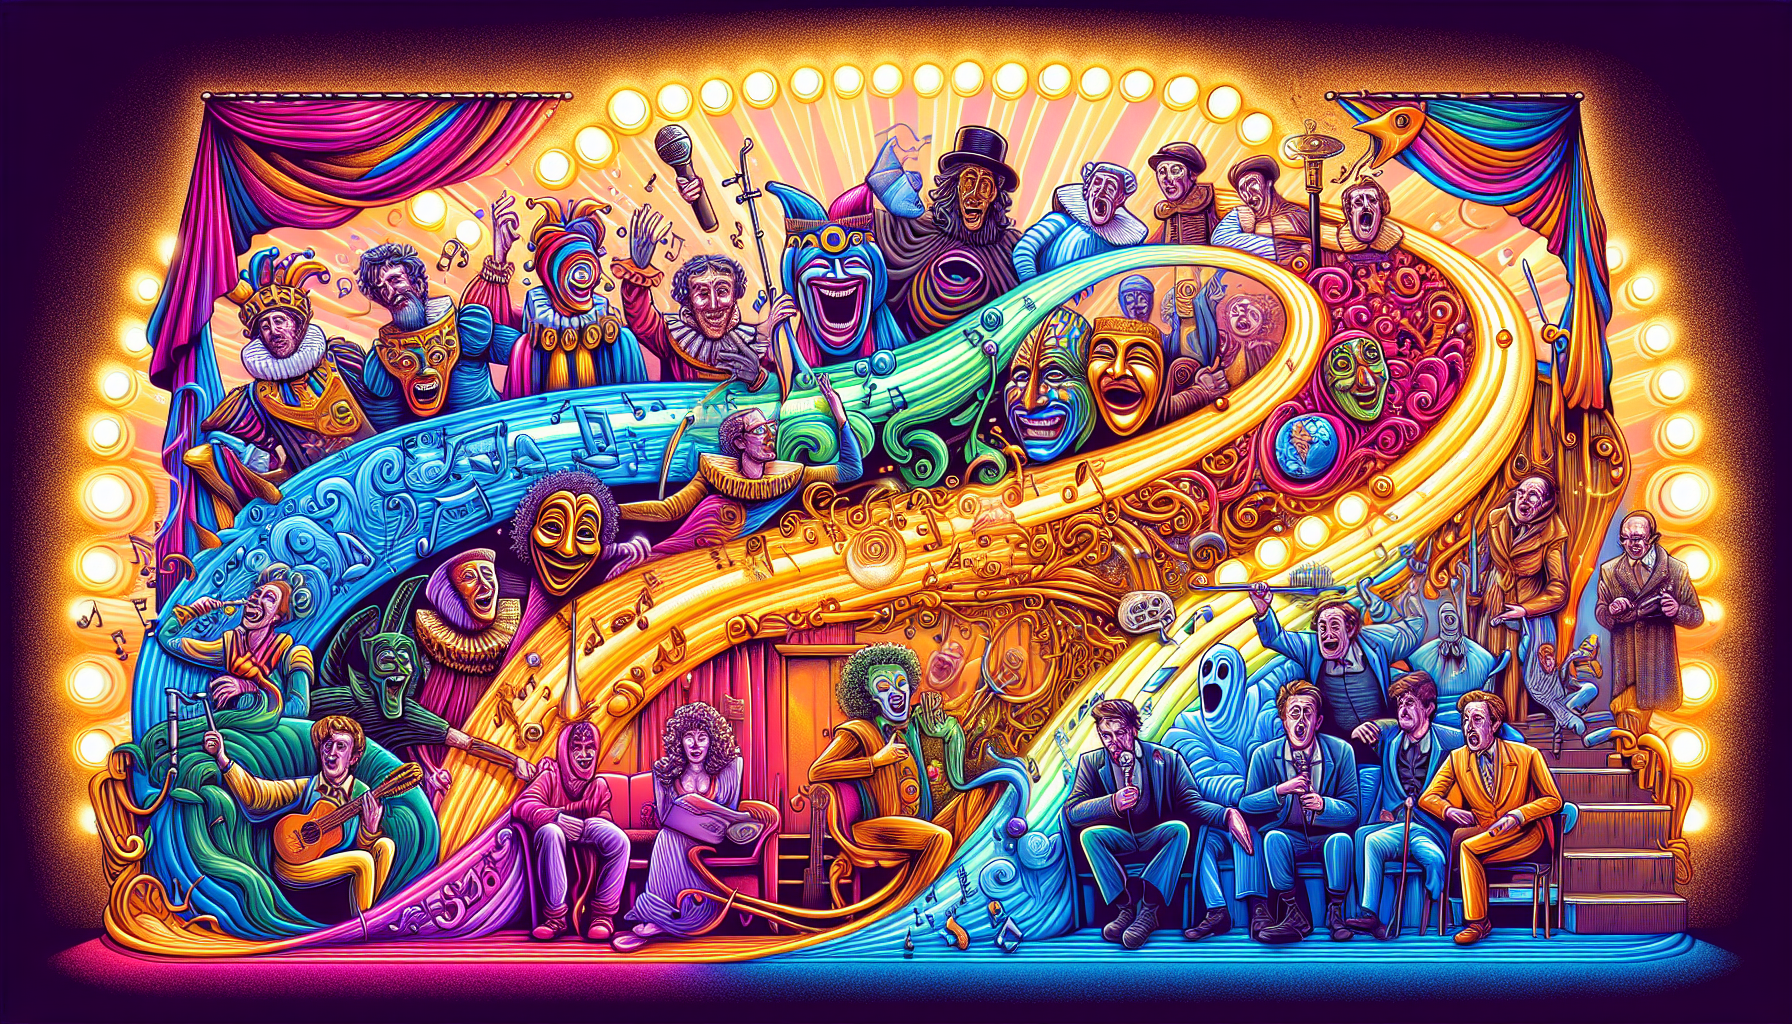 A whimsical, colorful illustration of a timeline showing different eras of comedy, from ancient Greek masks and Shakespearean jesters to modern stand-up comedians and sitcom actors, each depicted in t